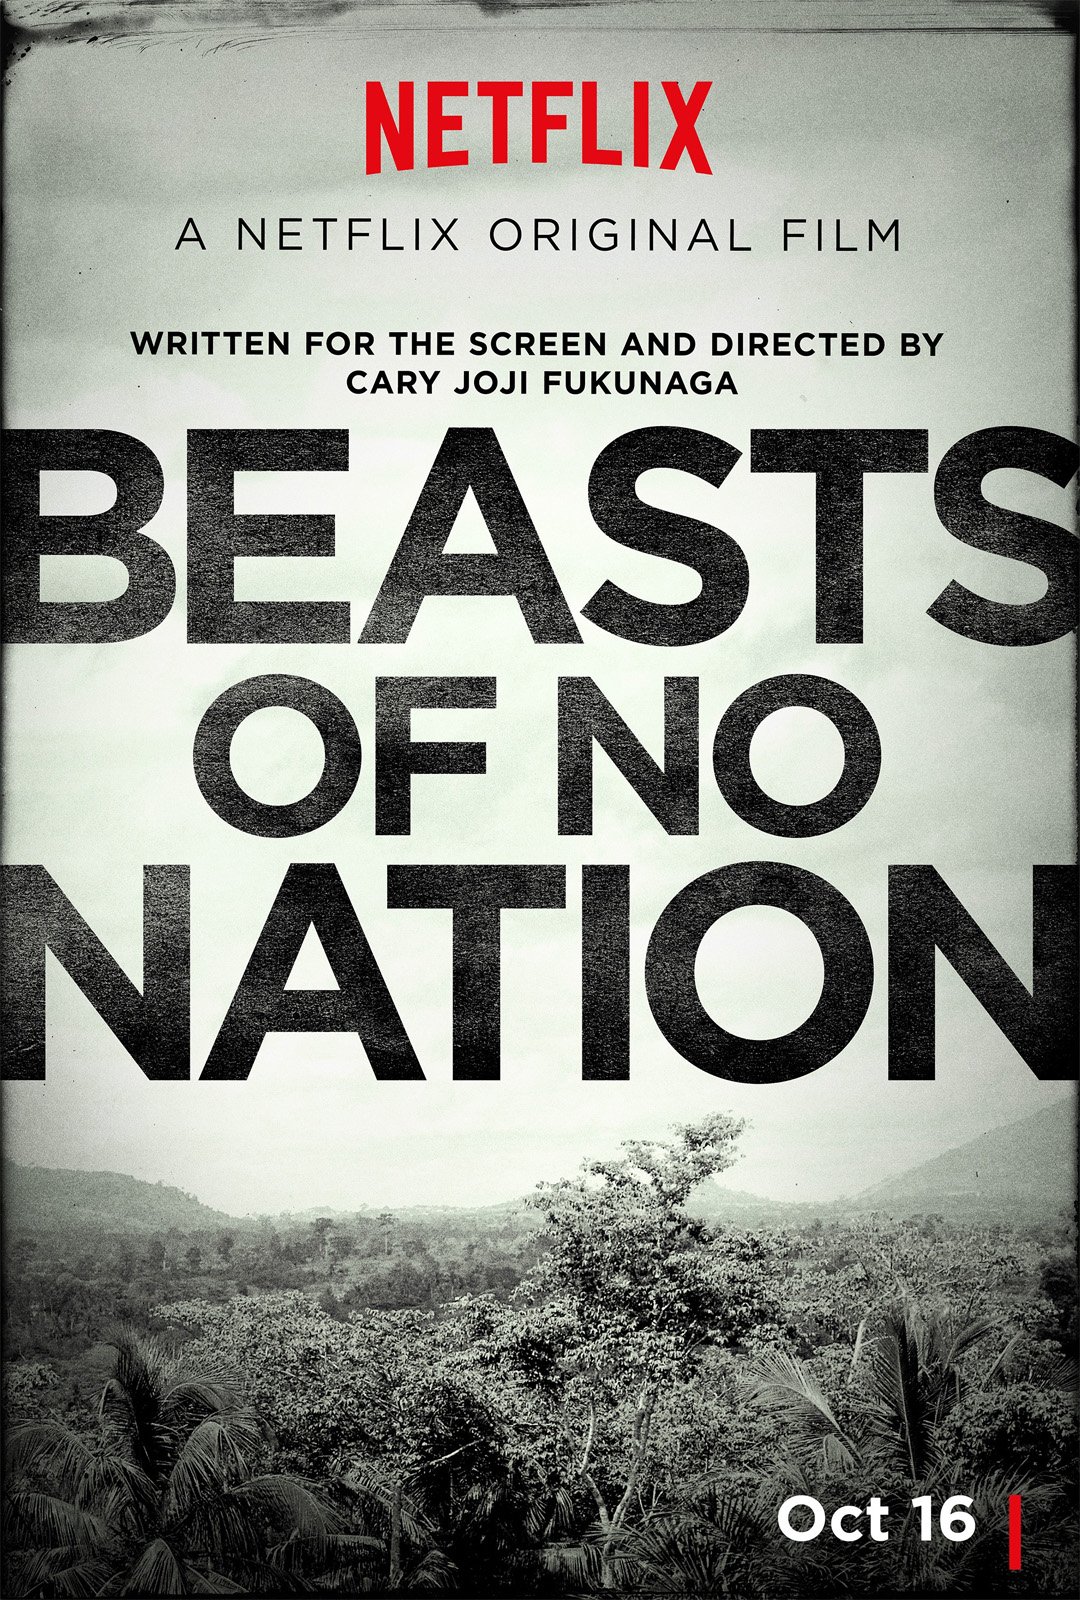 2015 Beasts Of No Nation